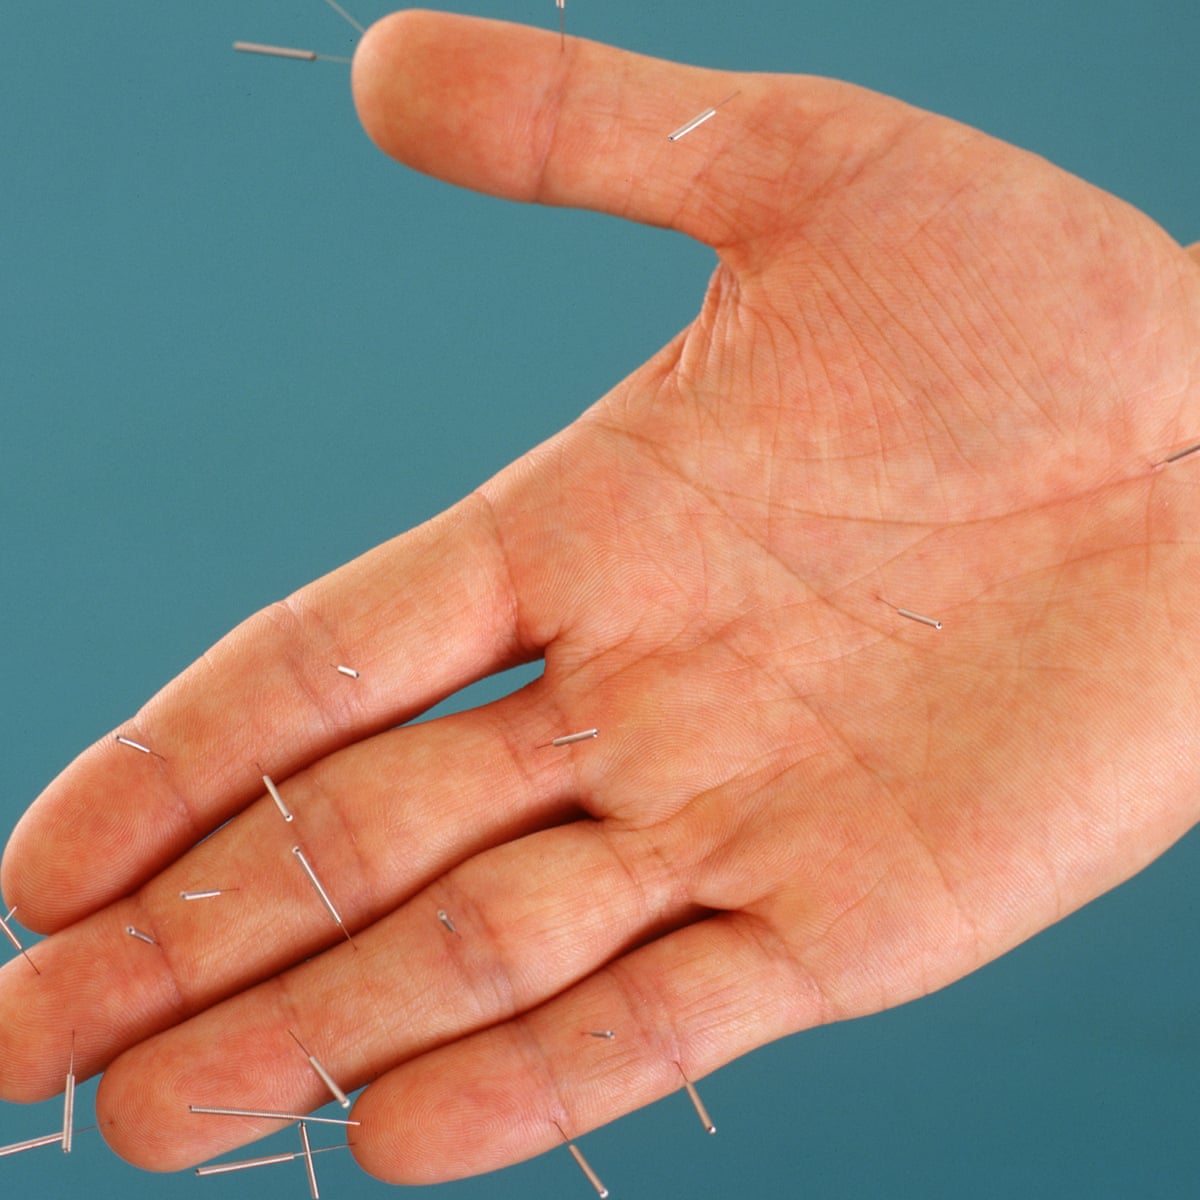 Acupuncture For Pain